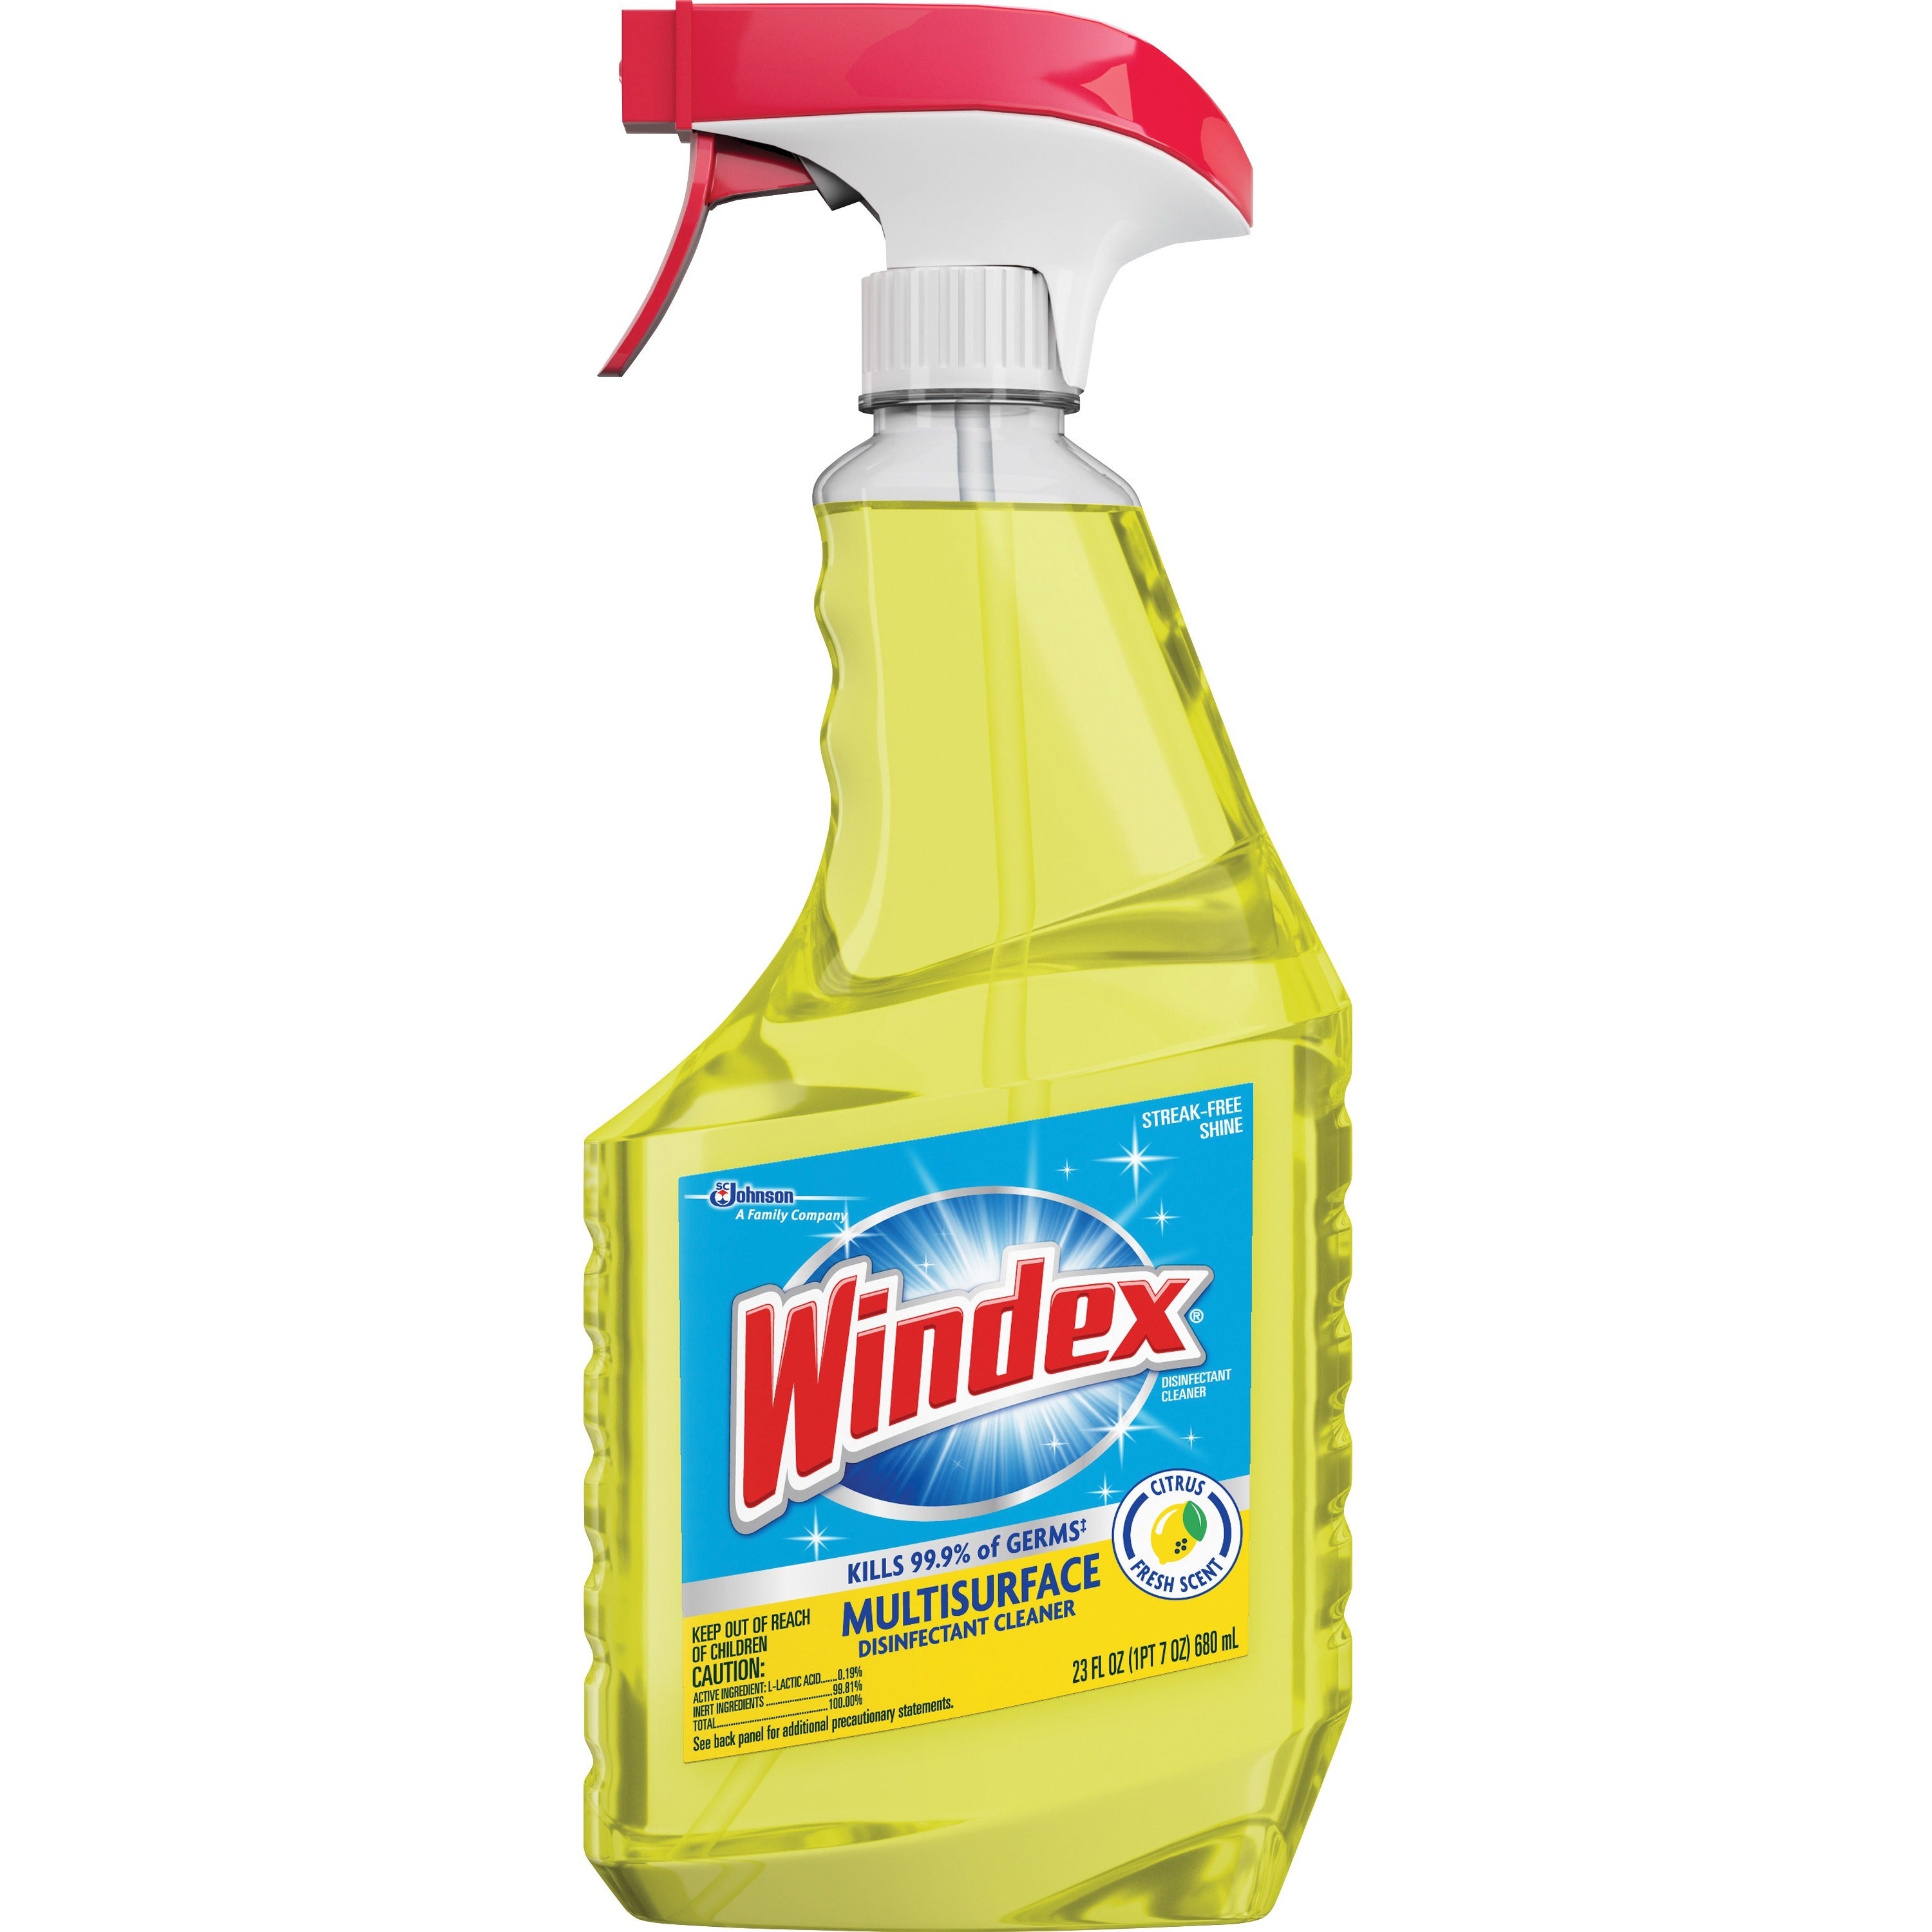 Windex MultiSurface Disinfectant Spray - Ready-To-Use - 23 fl oz (0.7 quart) - Fresh Citrus ScentBottle - 1 Each - Residue-free, Streak-free, Ammonia-free, Antibacterial, Disinfectant - Yellow